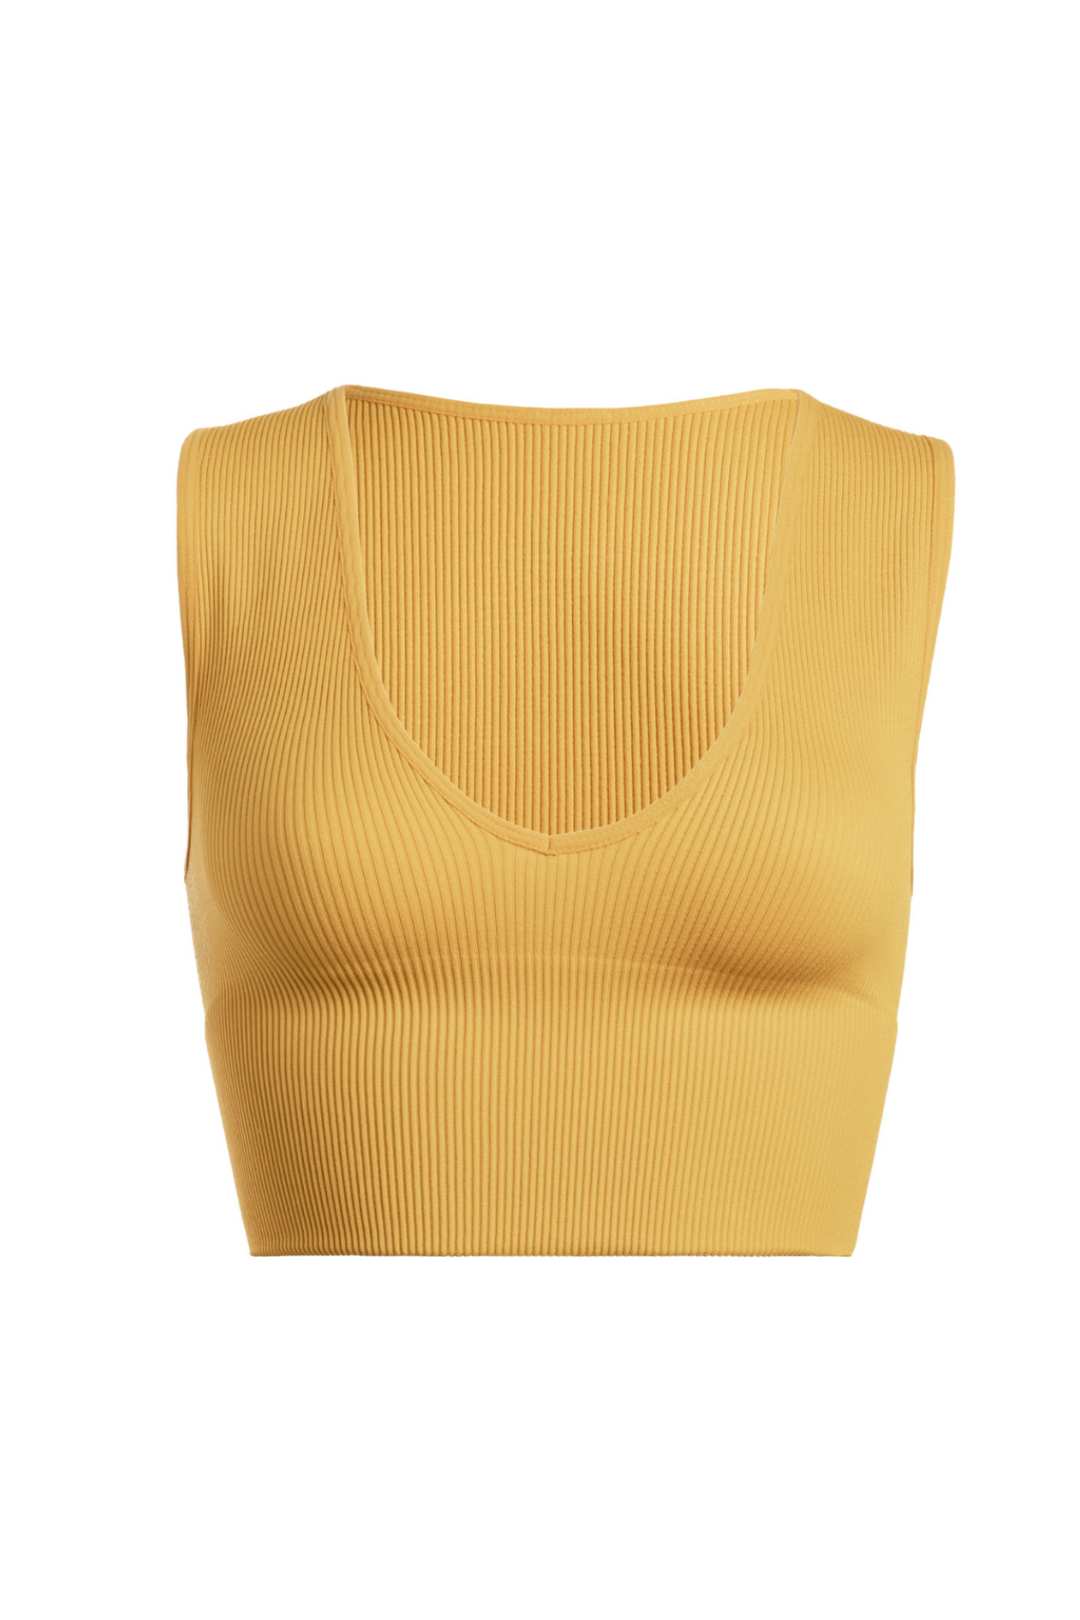 Snatched Tank Top | Mustard